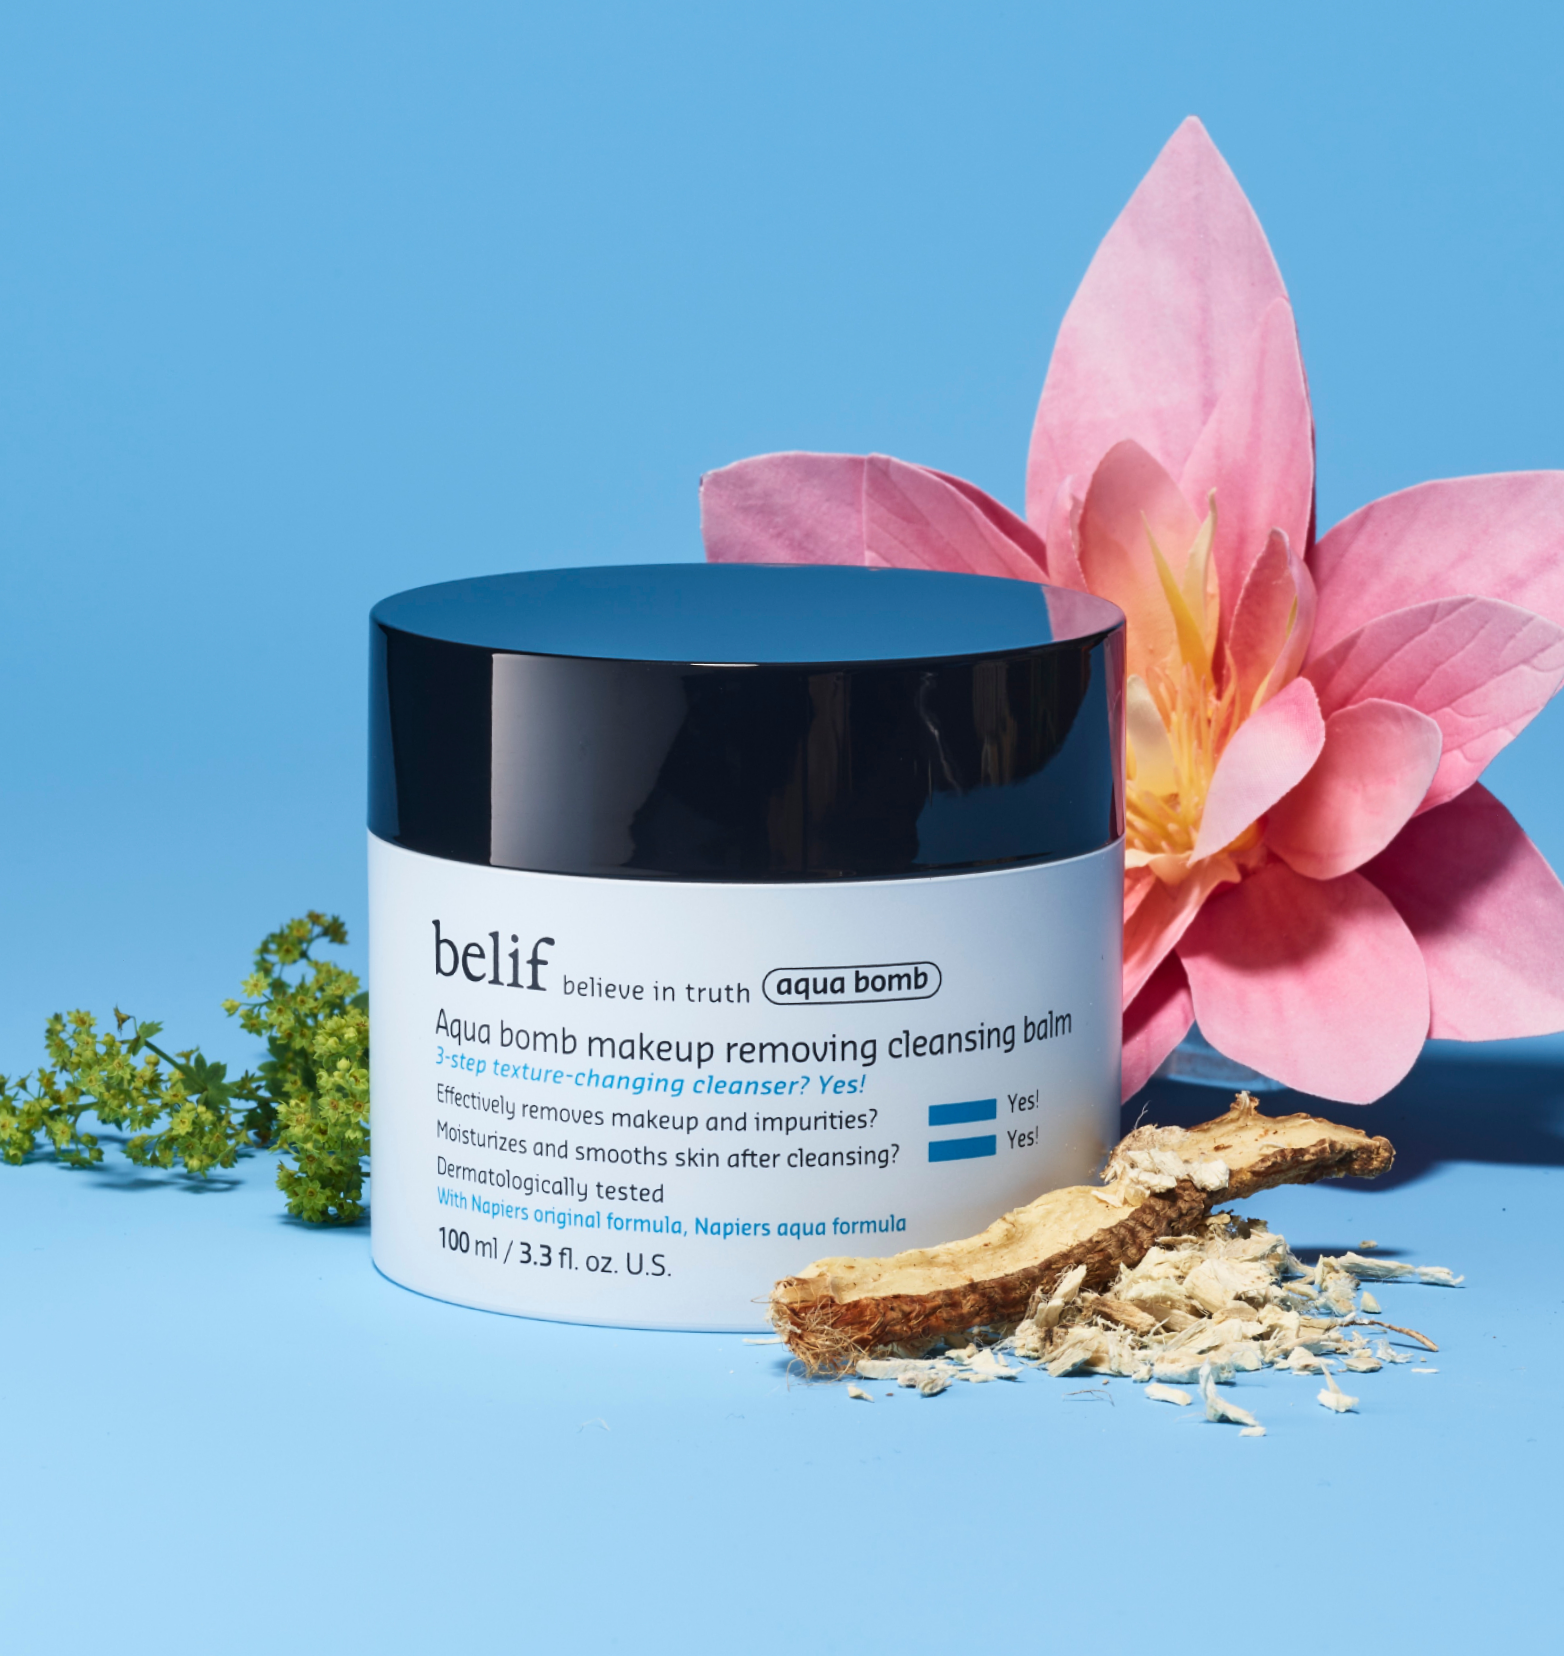 A white jar of belif Aqua Bomb Makeup Removing Cleansing Balm standing on a light blue surface among flowers and twigs